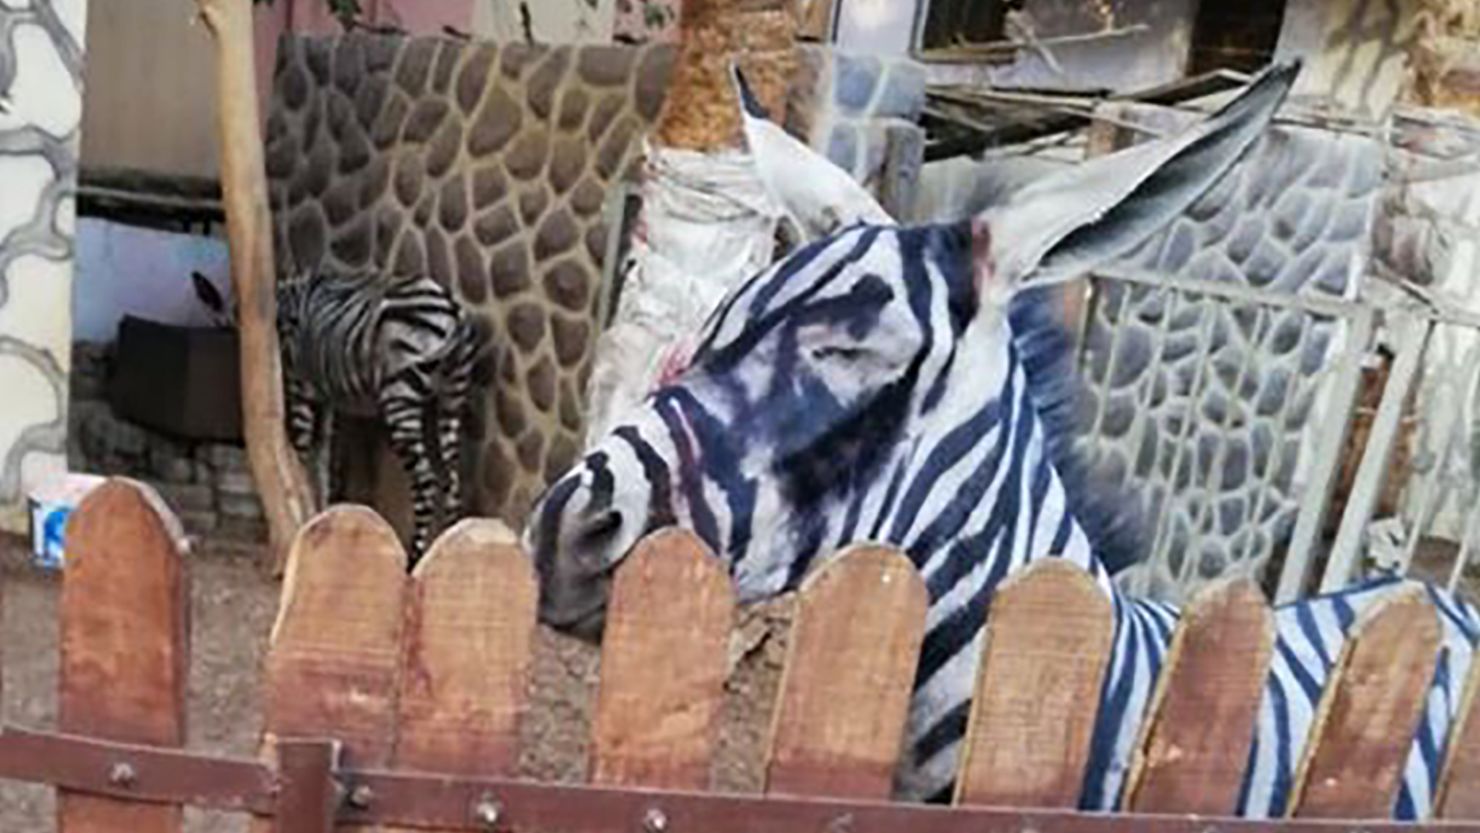 Is this a zebra or donkey? The zoo says zebra but the visitor says donkey.